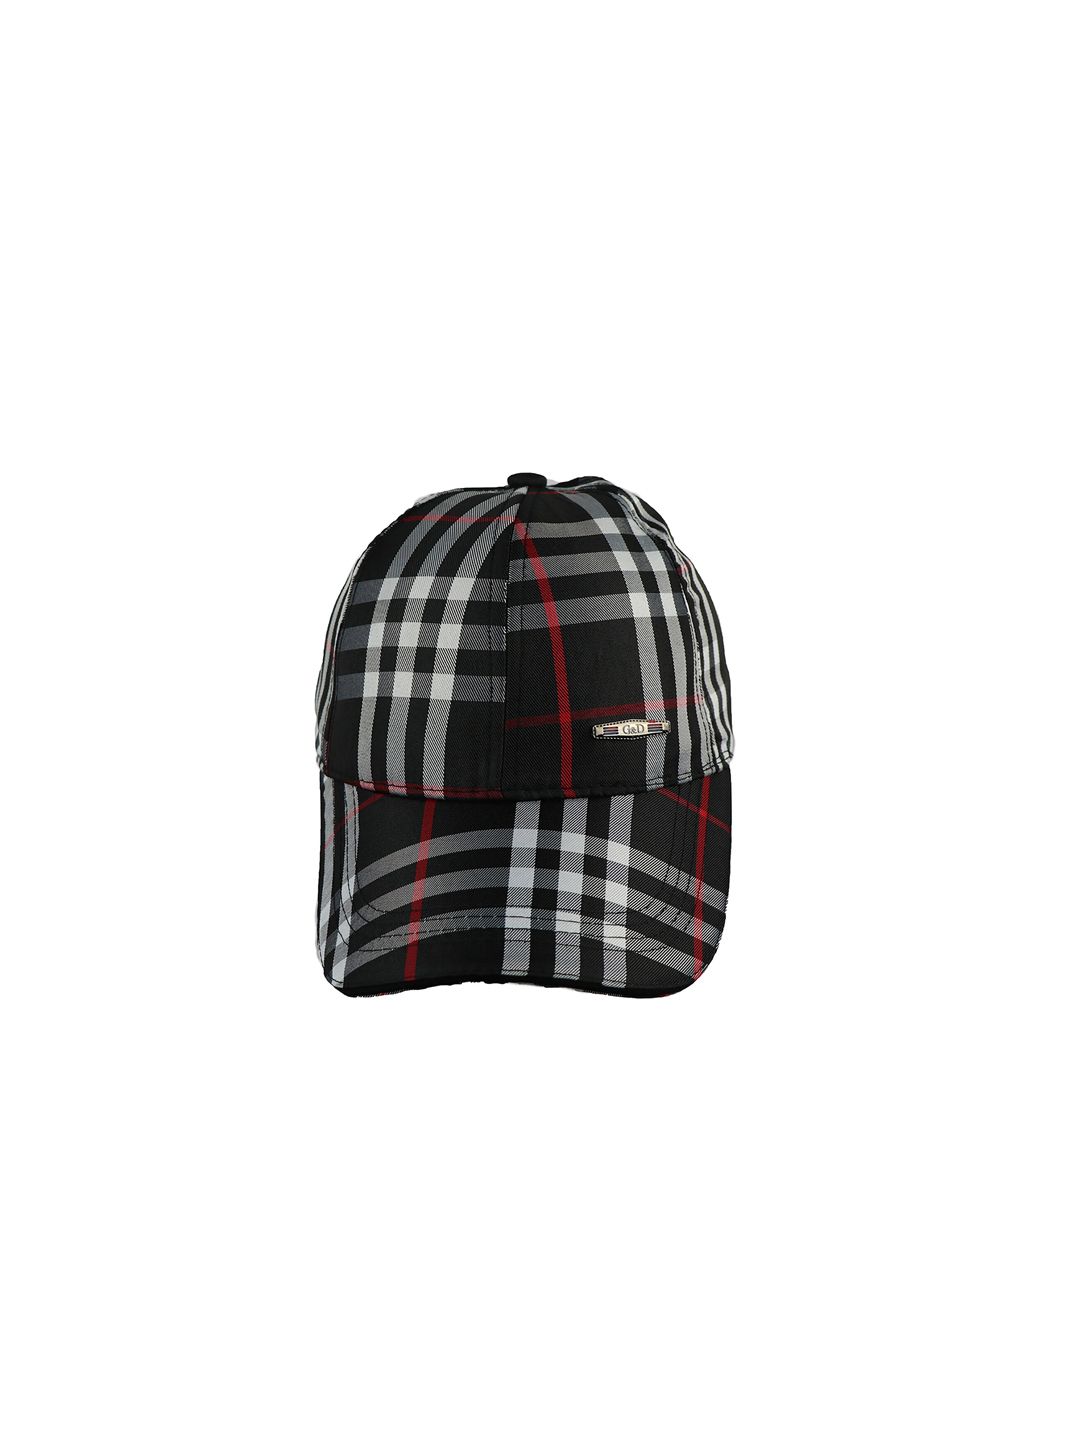 iSWEVEN Unisex Black & White Checked Adjustable Snapback Cap Price in India